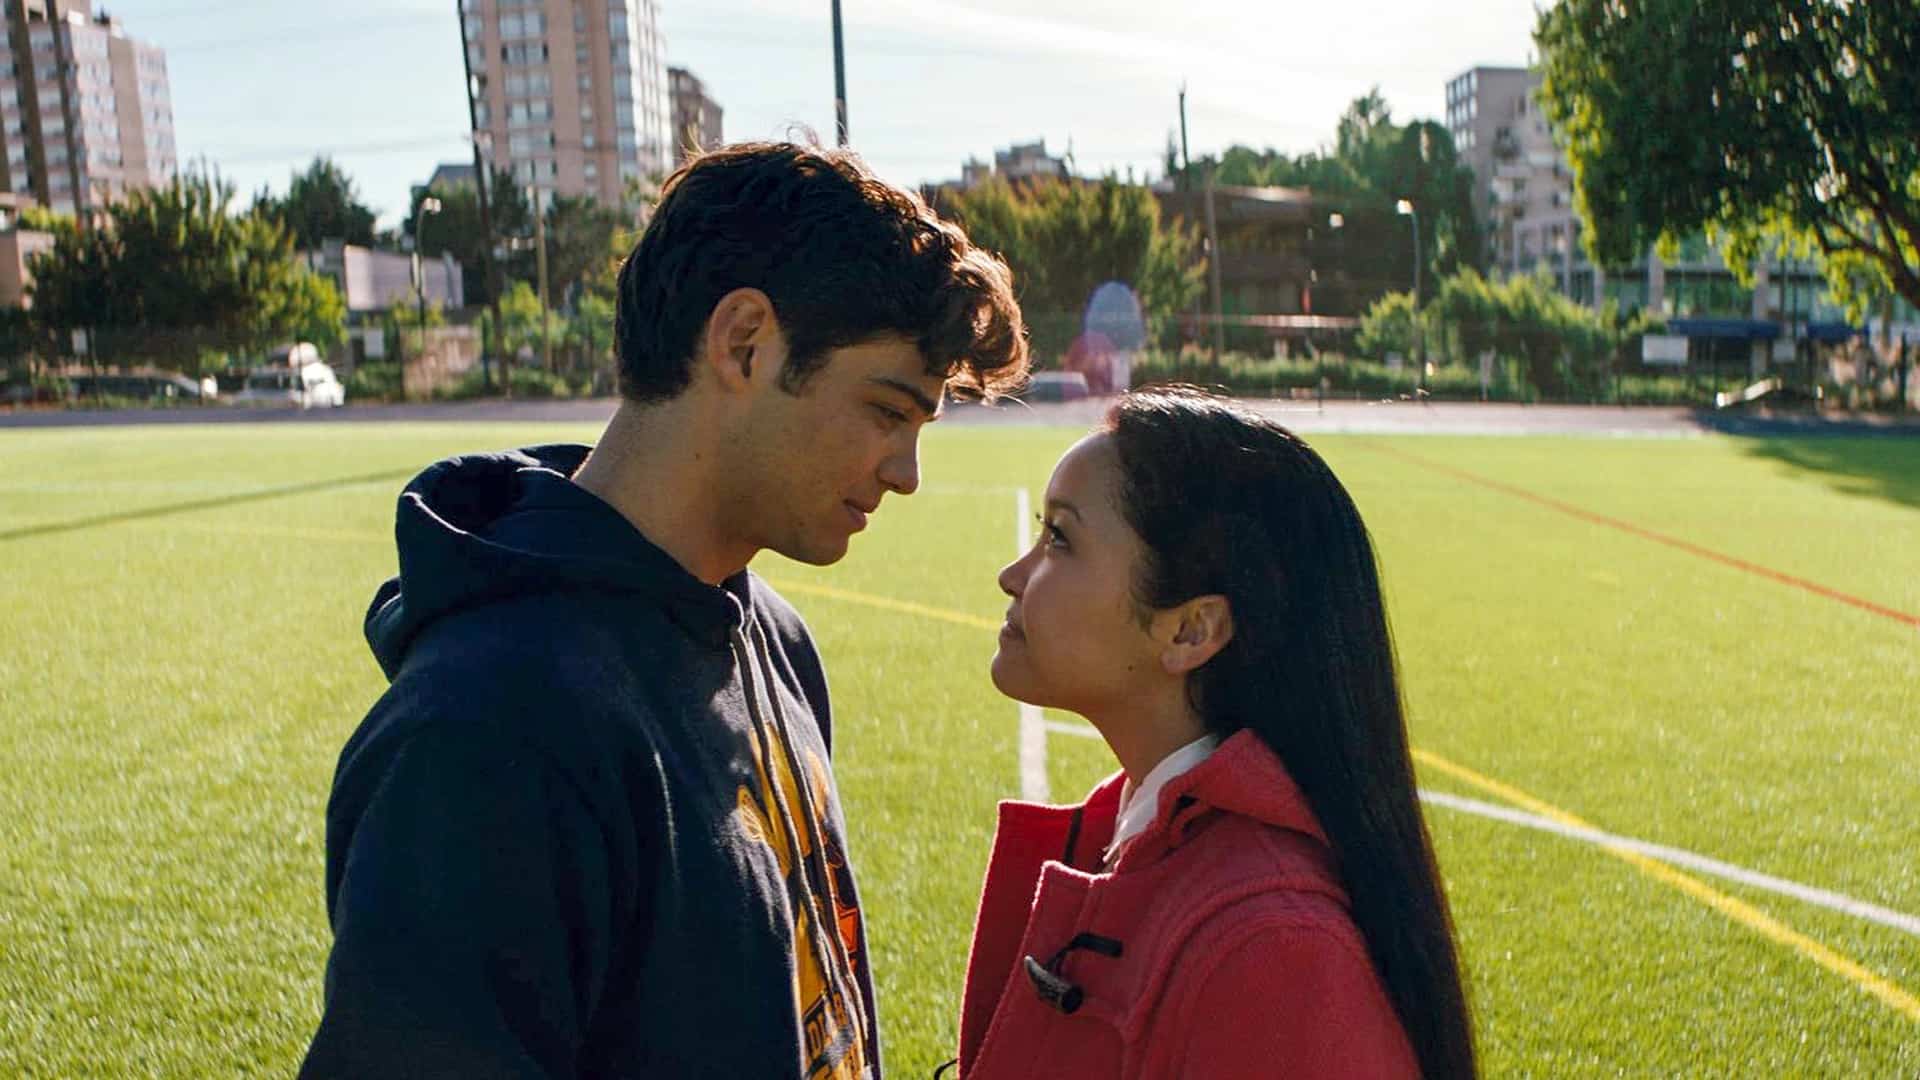 A boy and girl stand on a school field looking at each other in this image from Netflix